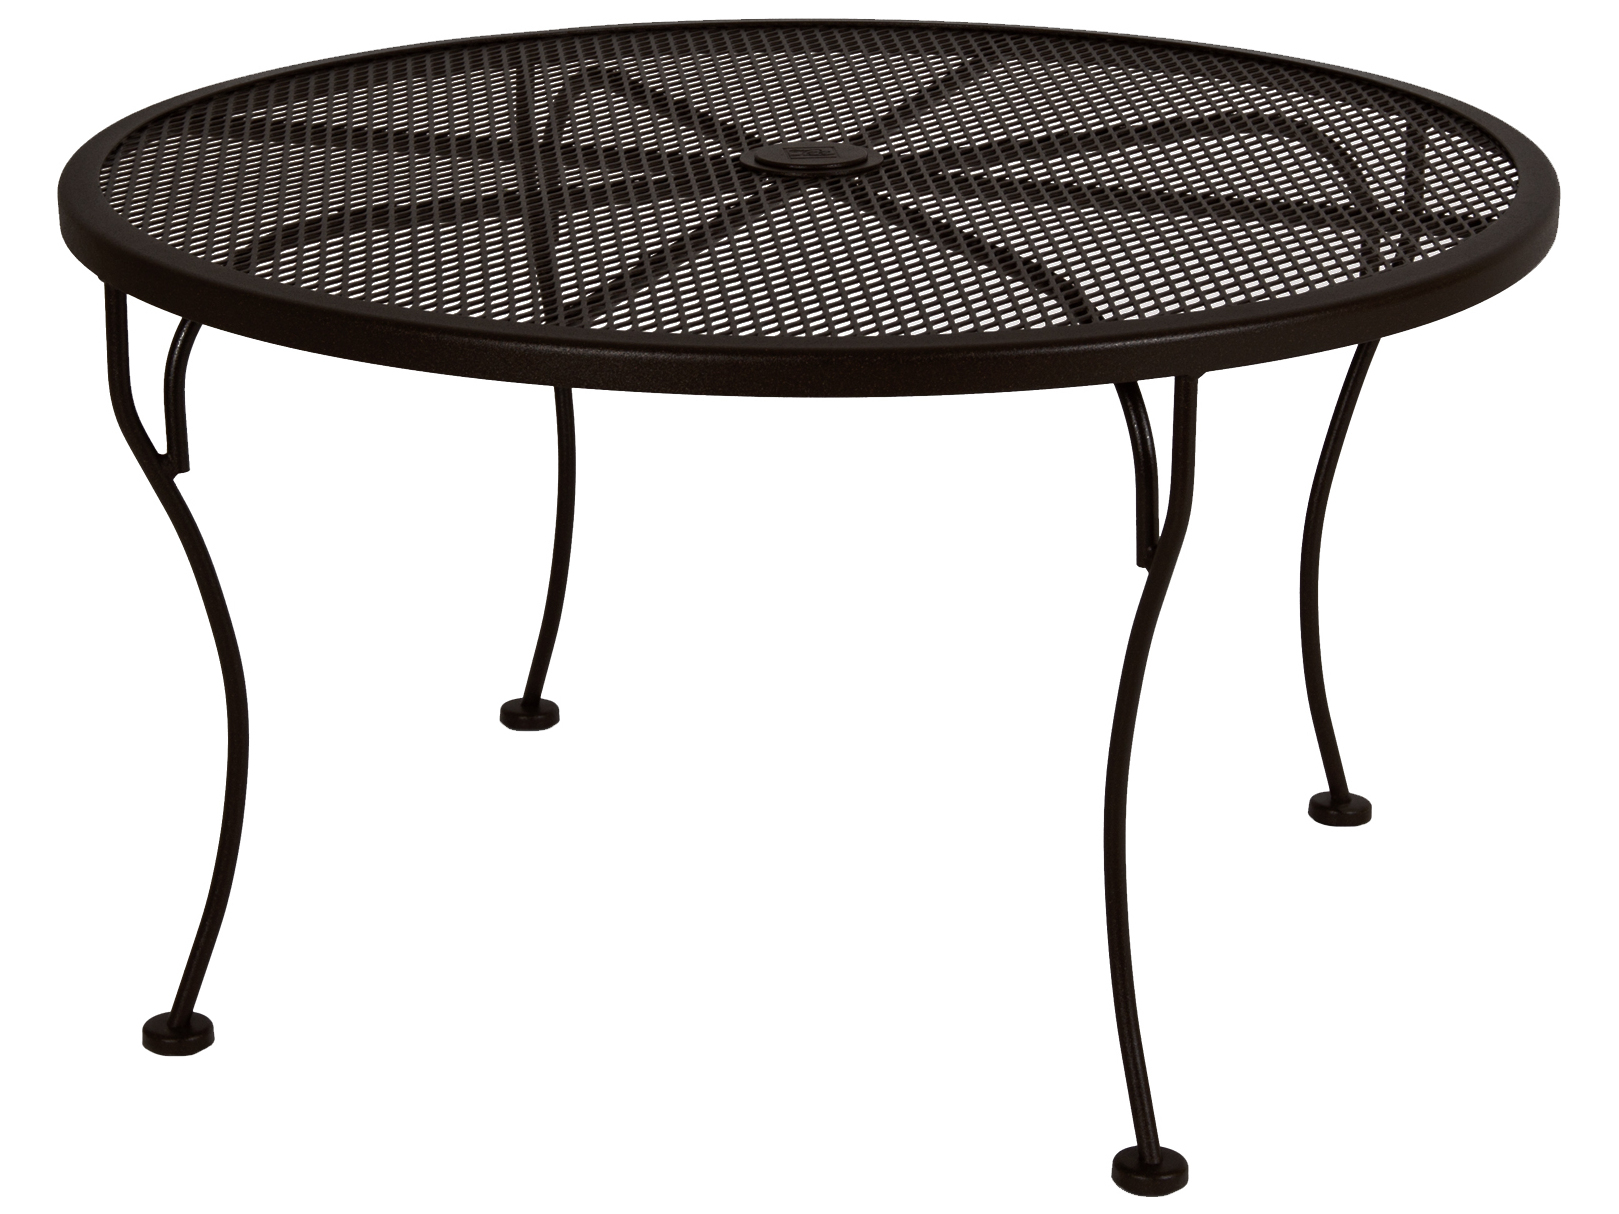 Ow Lee Micro Mesh Wrought Iron 36 Round Side Table With Umbrella Hole Ow36mmstu